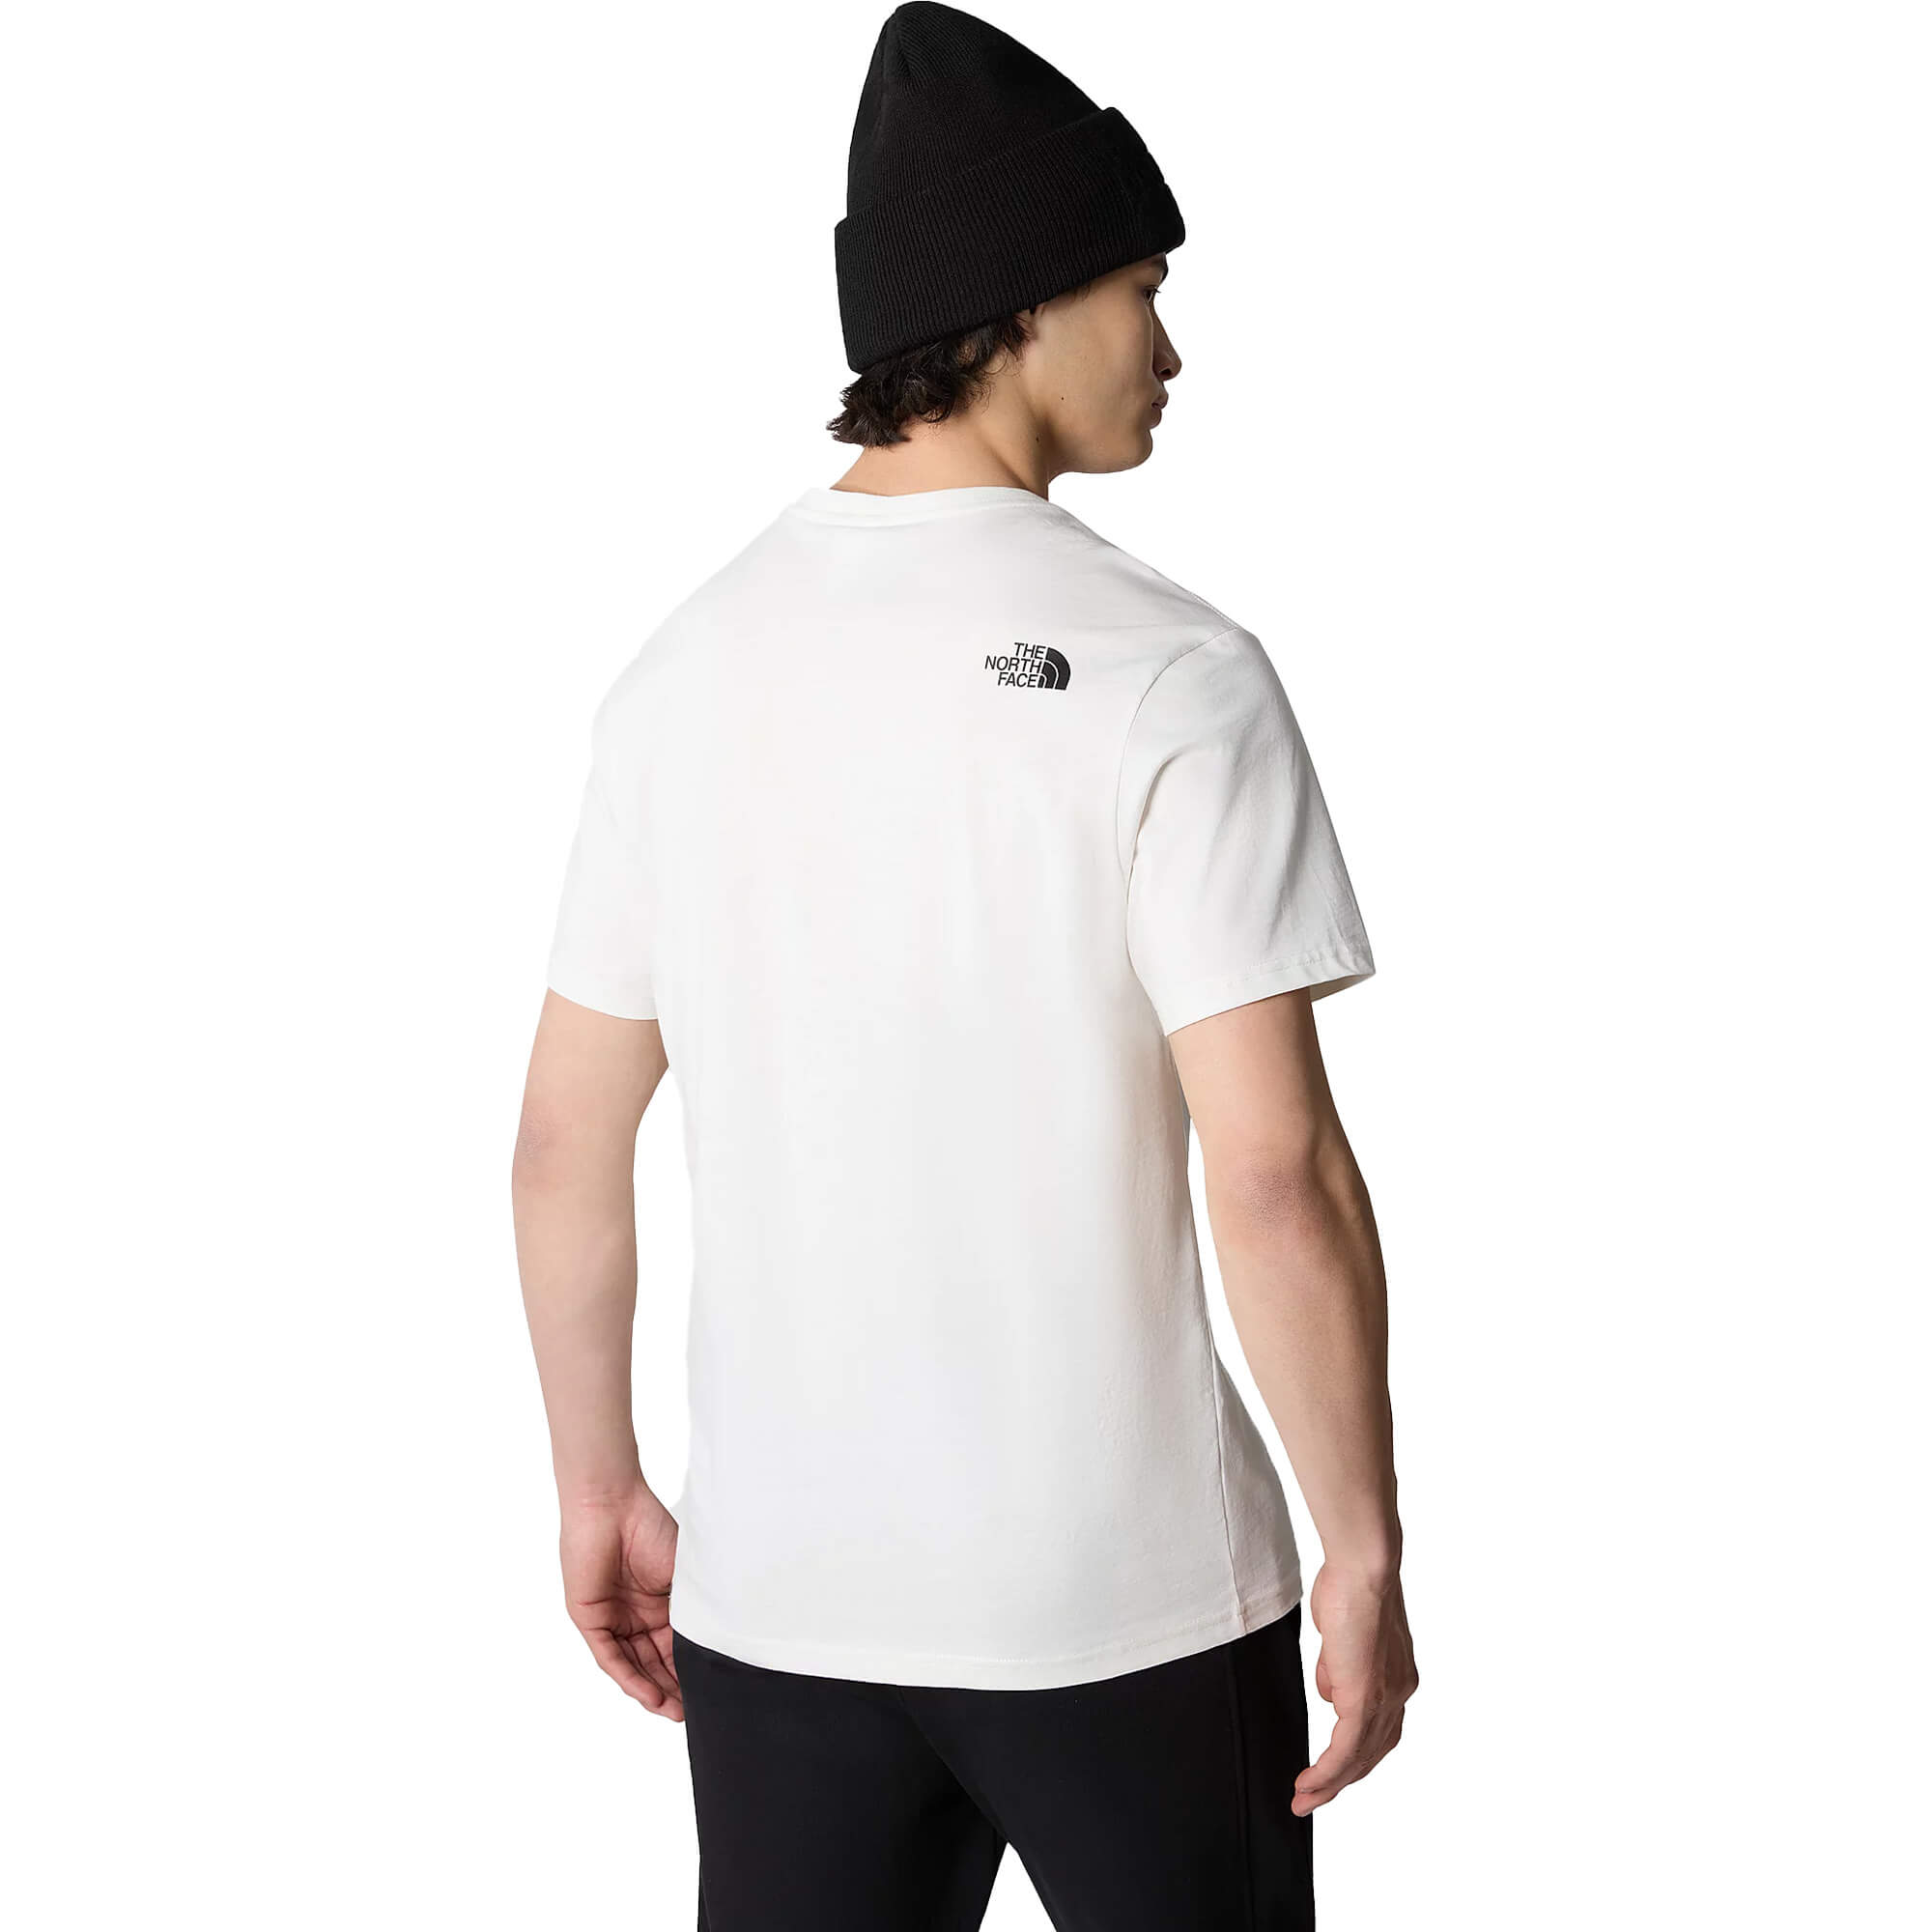 The North Face Short Sleeve Easy Tee Crew Neck T-shirt